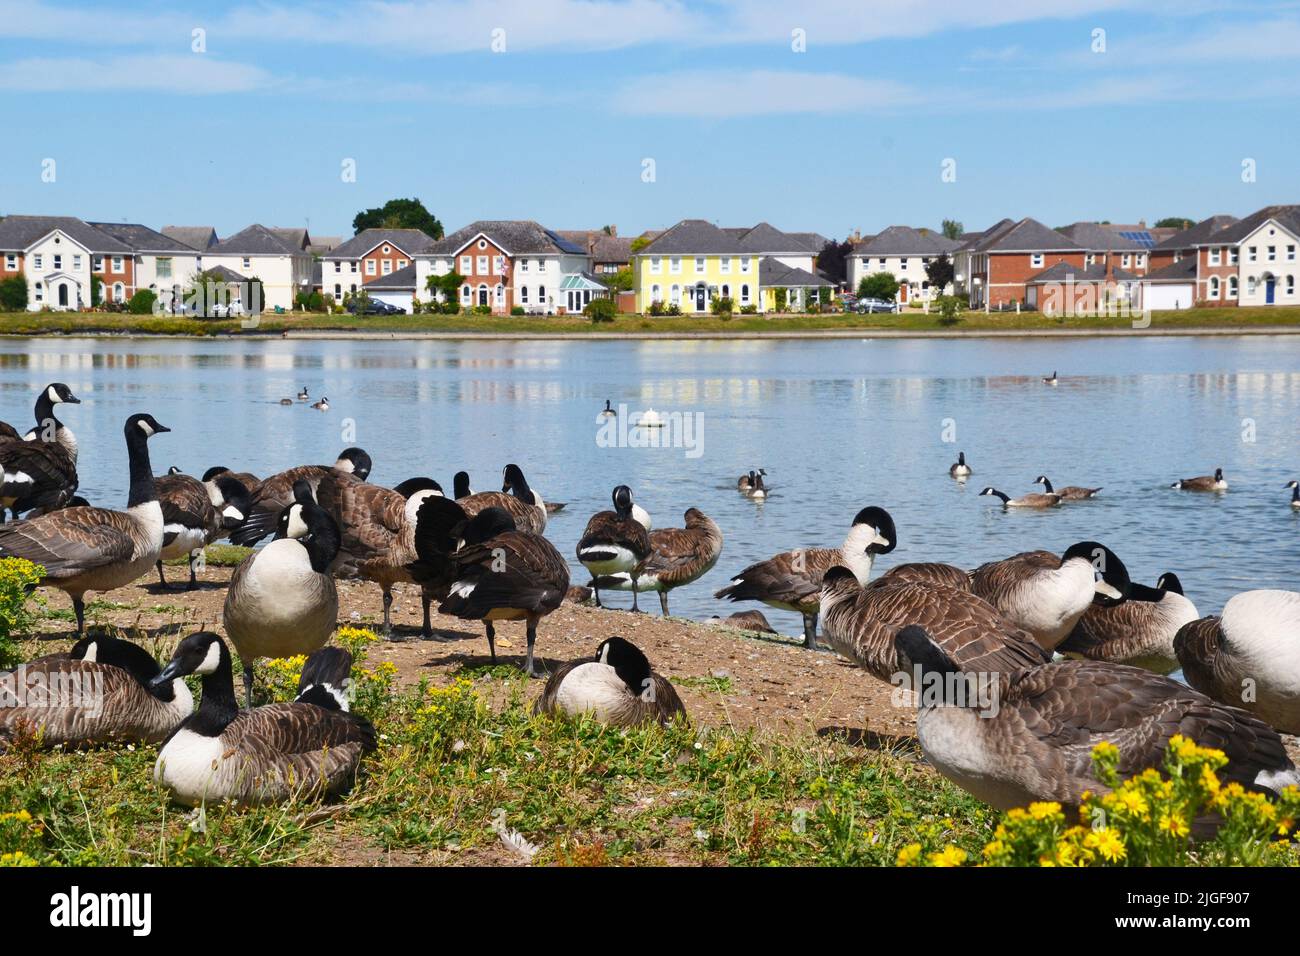 Canada geese on the shore beside the lake at Watermead, Aylesbury, Buckinghamshire, England, UK Stock Photo